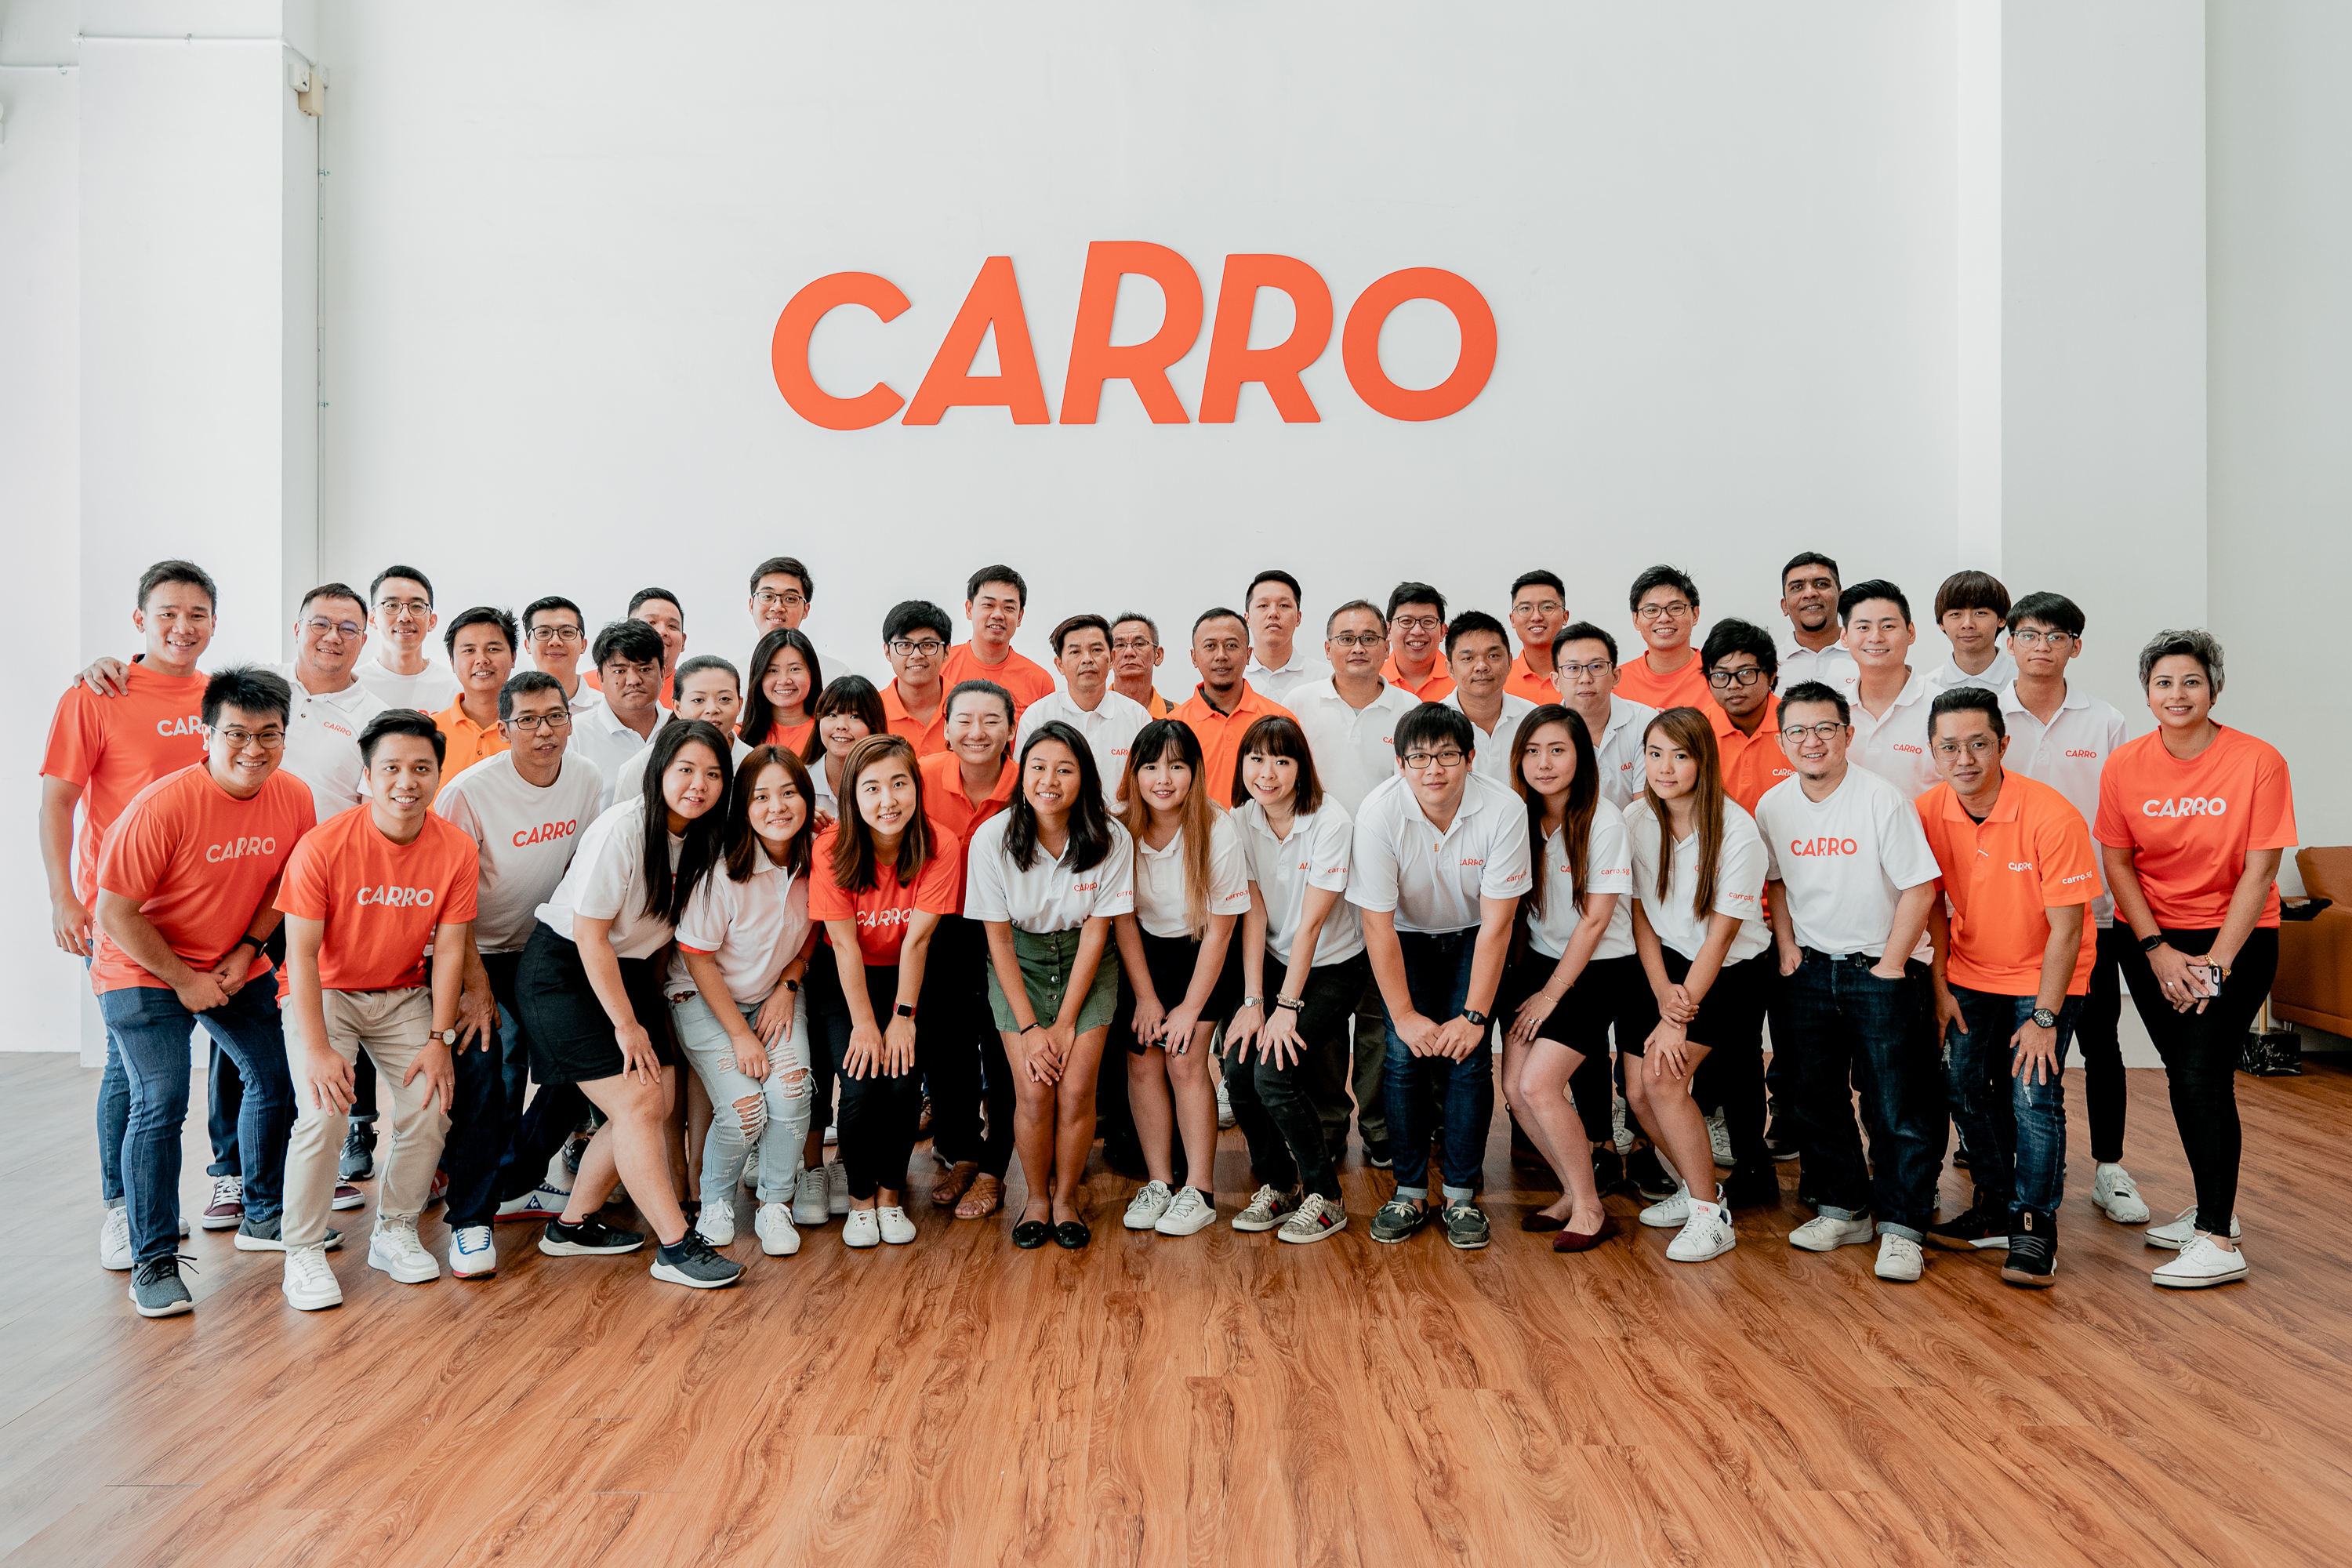 Carro's year in review